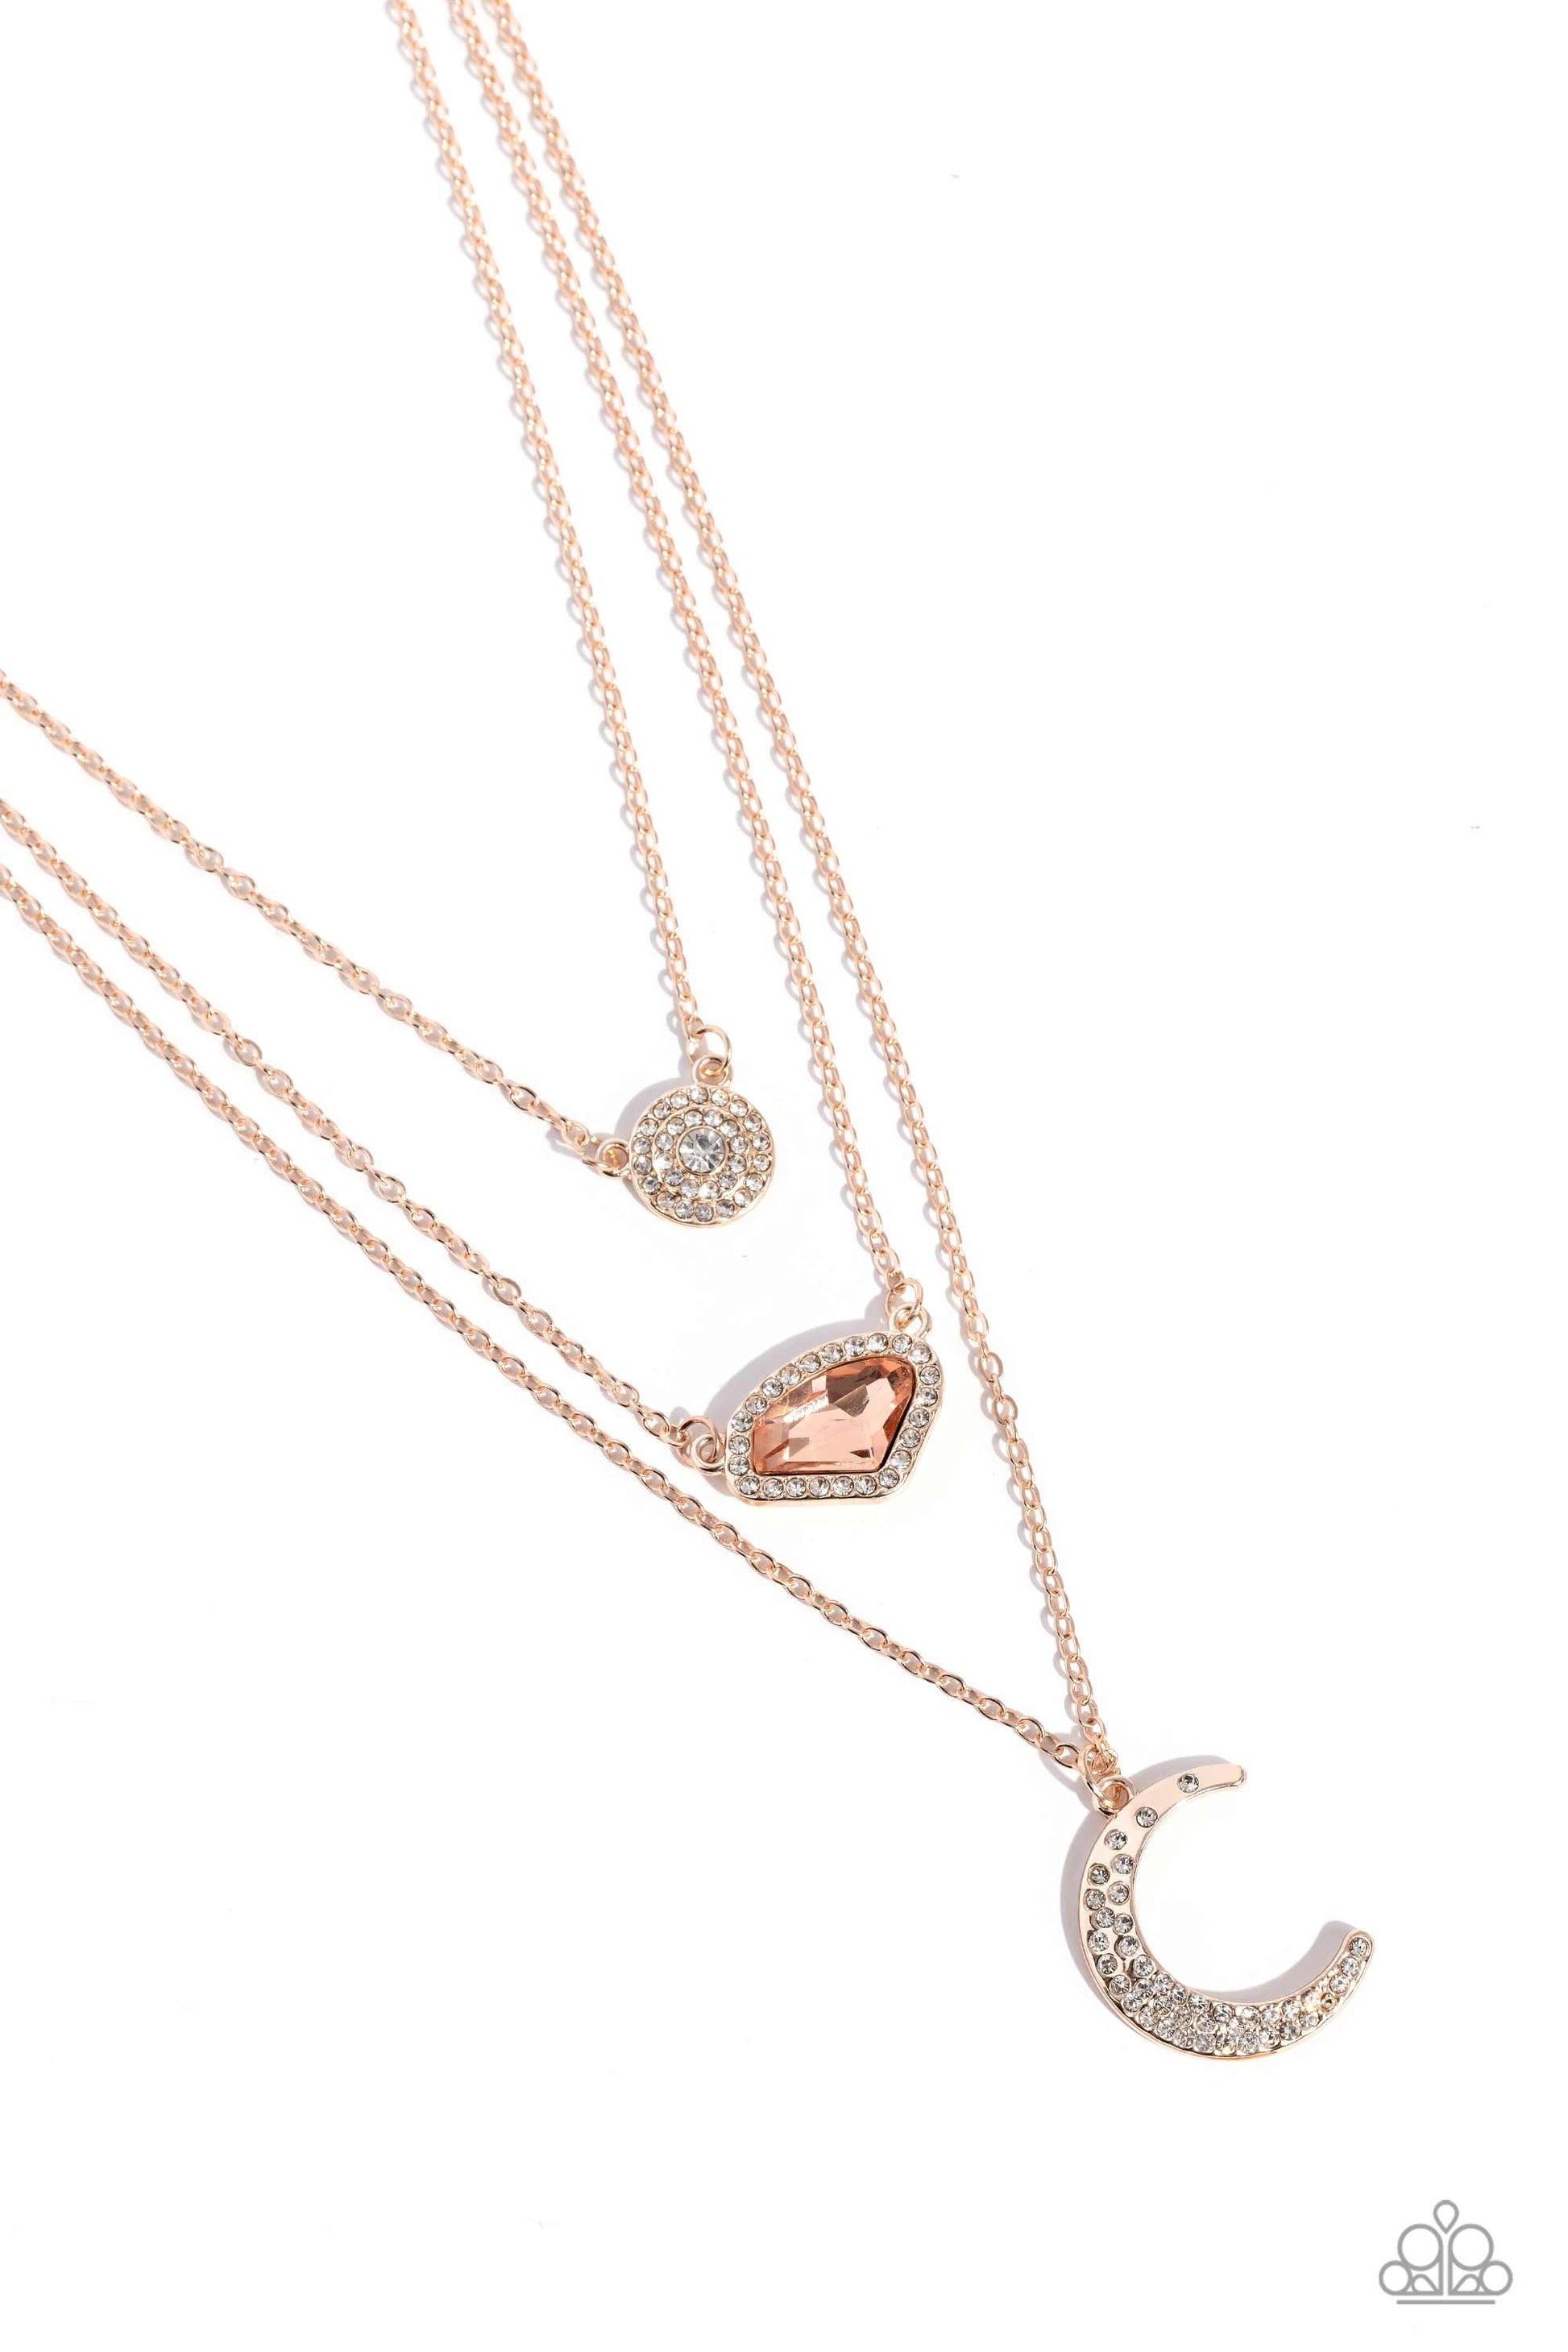 Lunar Lineup Rose Gold Necklace - Paparazzi Accessories  Three shimmery rose gold chains, infused with three stellar pendants, layer across the chest in a celestial display. A dainty, white rhinestone-encrusted, rose gold pendant with a white center swings from the uppermost chain, followed by an asymmetrical, jagged, peach gem encased in a border of dainty white rhinestones, and a rose gold crescent moon charm with dainty white rhinestones, creating a starry shimmer.